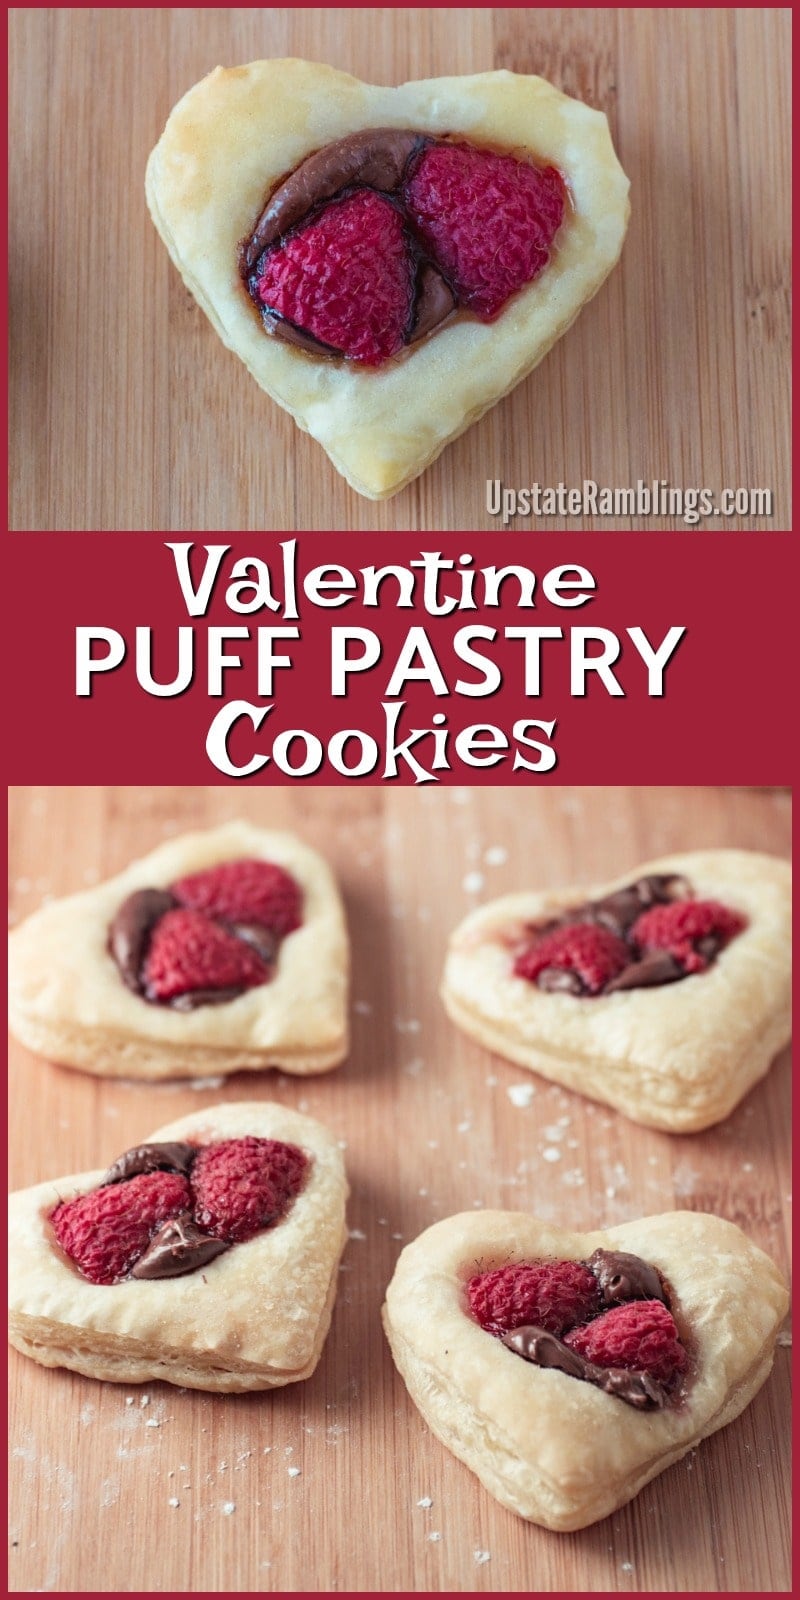 These Valentine Puff Pastry Cookies are super easy to make, and perfect for Valentine's Day! Puff pastry is cut into hearts and topped with creamy Nutella and raspberries then baked until golden brown for a sweet and flaky cookie that is ready in minutes. Only three ingredients! #cookies #hearts #nutella #valentinesday